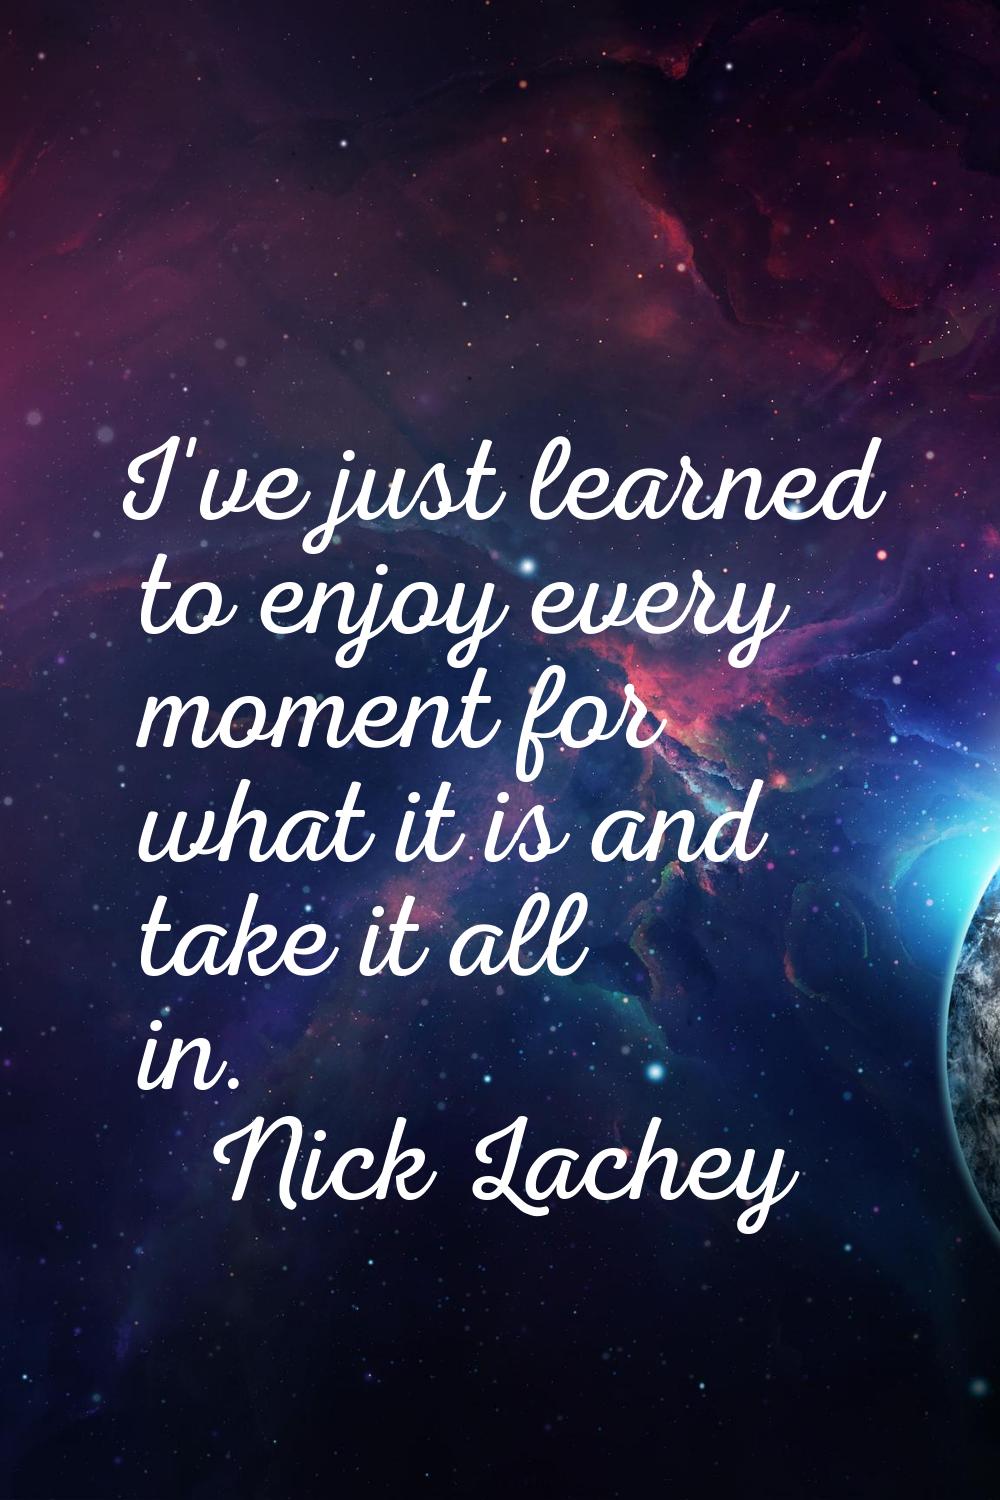 I've just learned to enjoy every moment for what it is and take it all in.